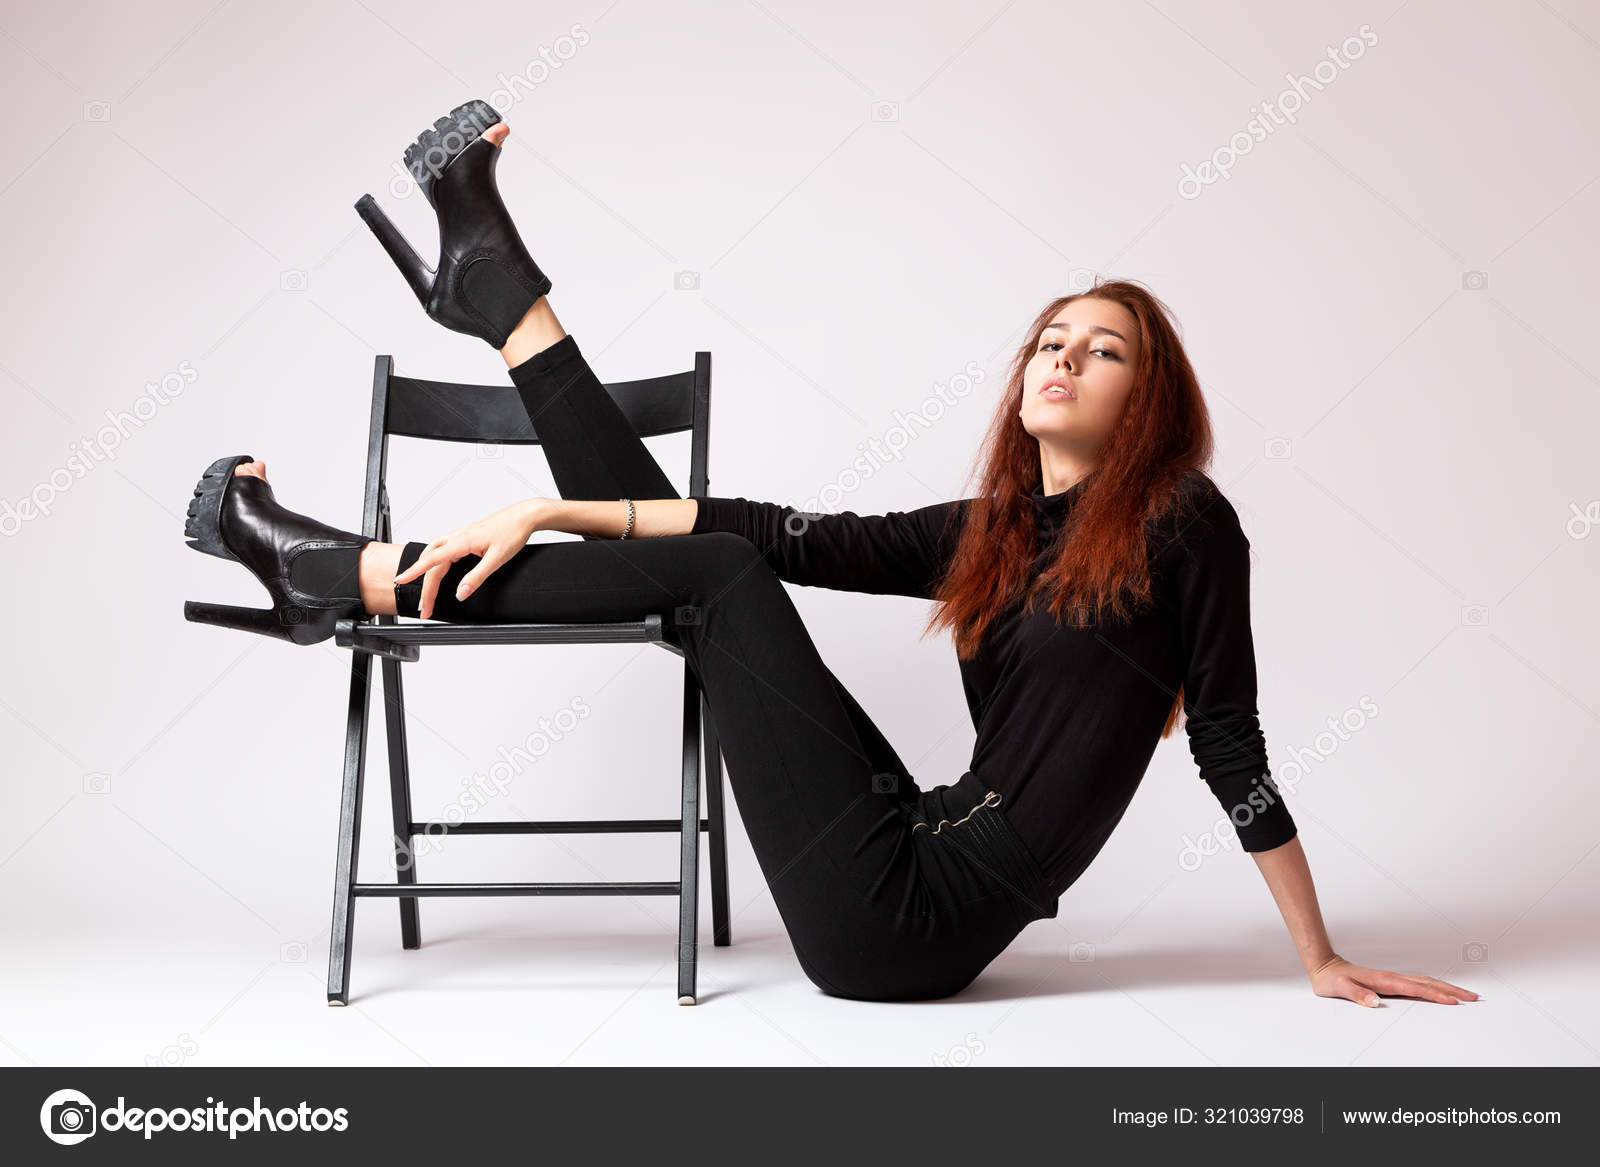 Download this stock image: Portrait beautiful woman with attitude sitting  on a chair wearing blac… | Sitting poses, Sitting pose reference, Studio photography  poses